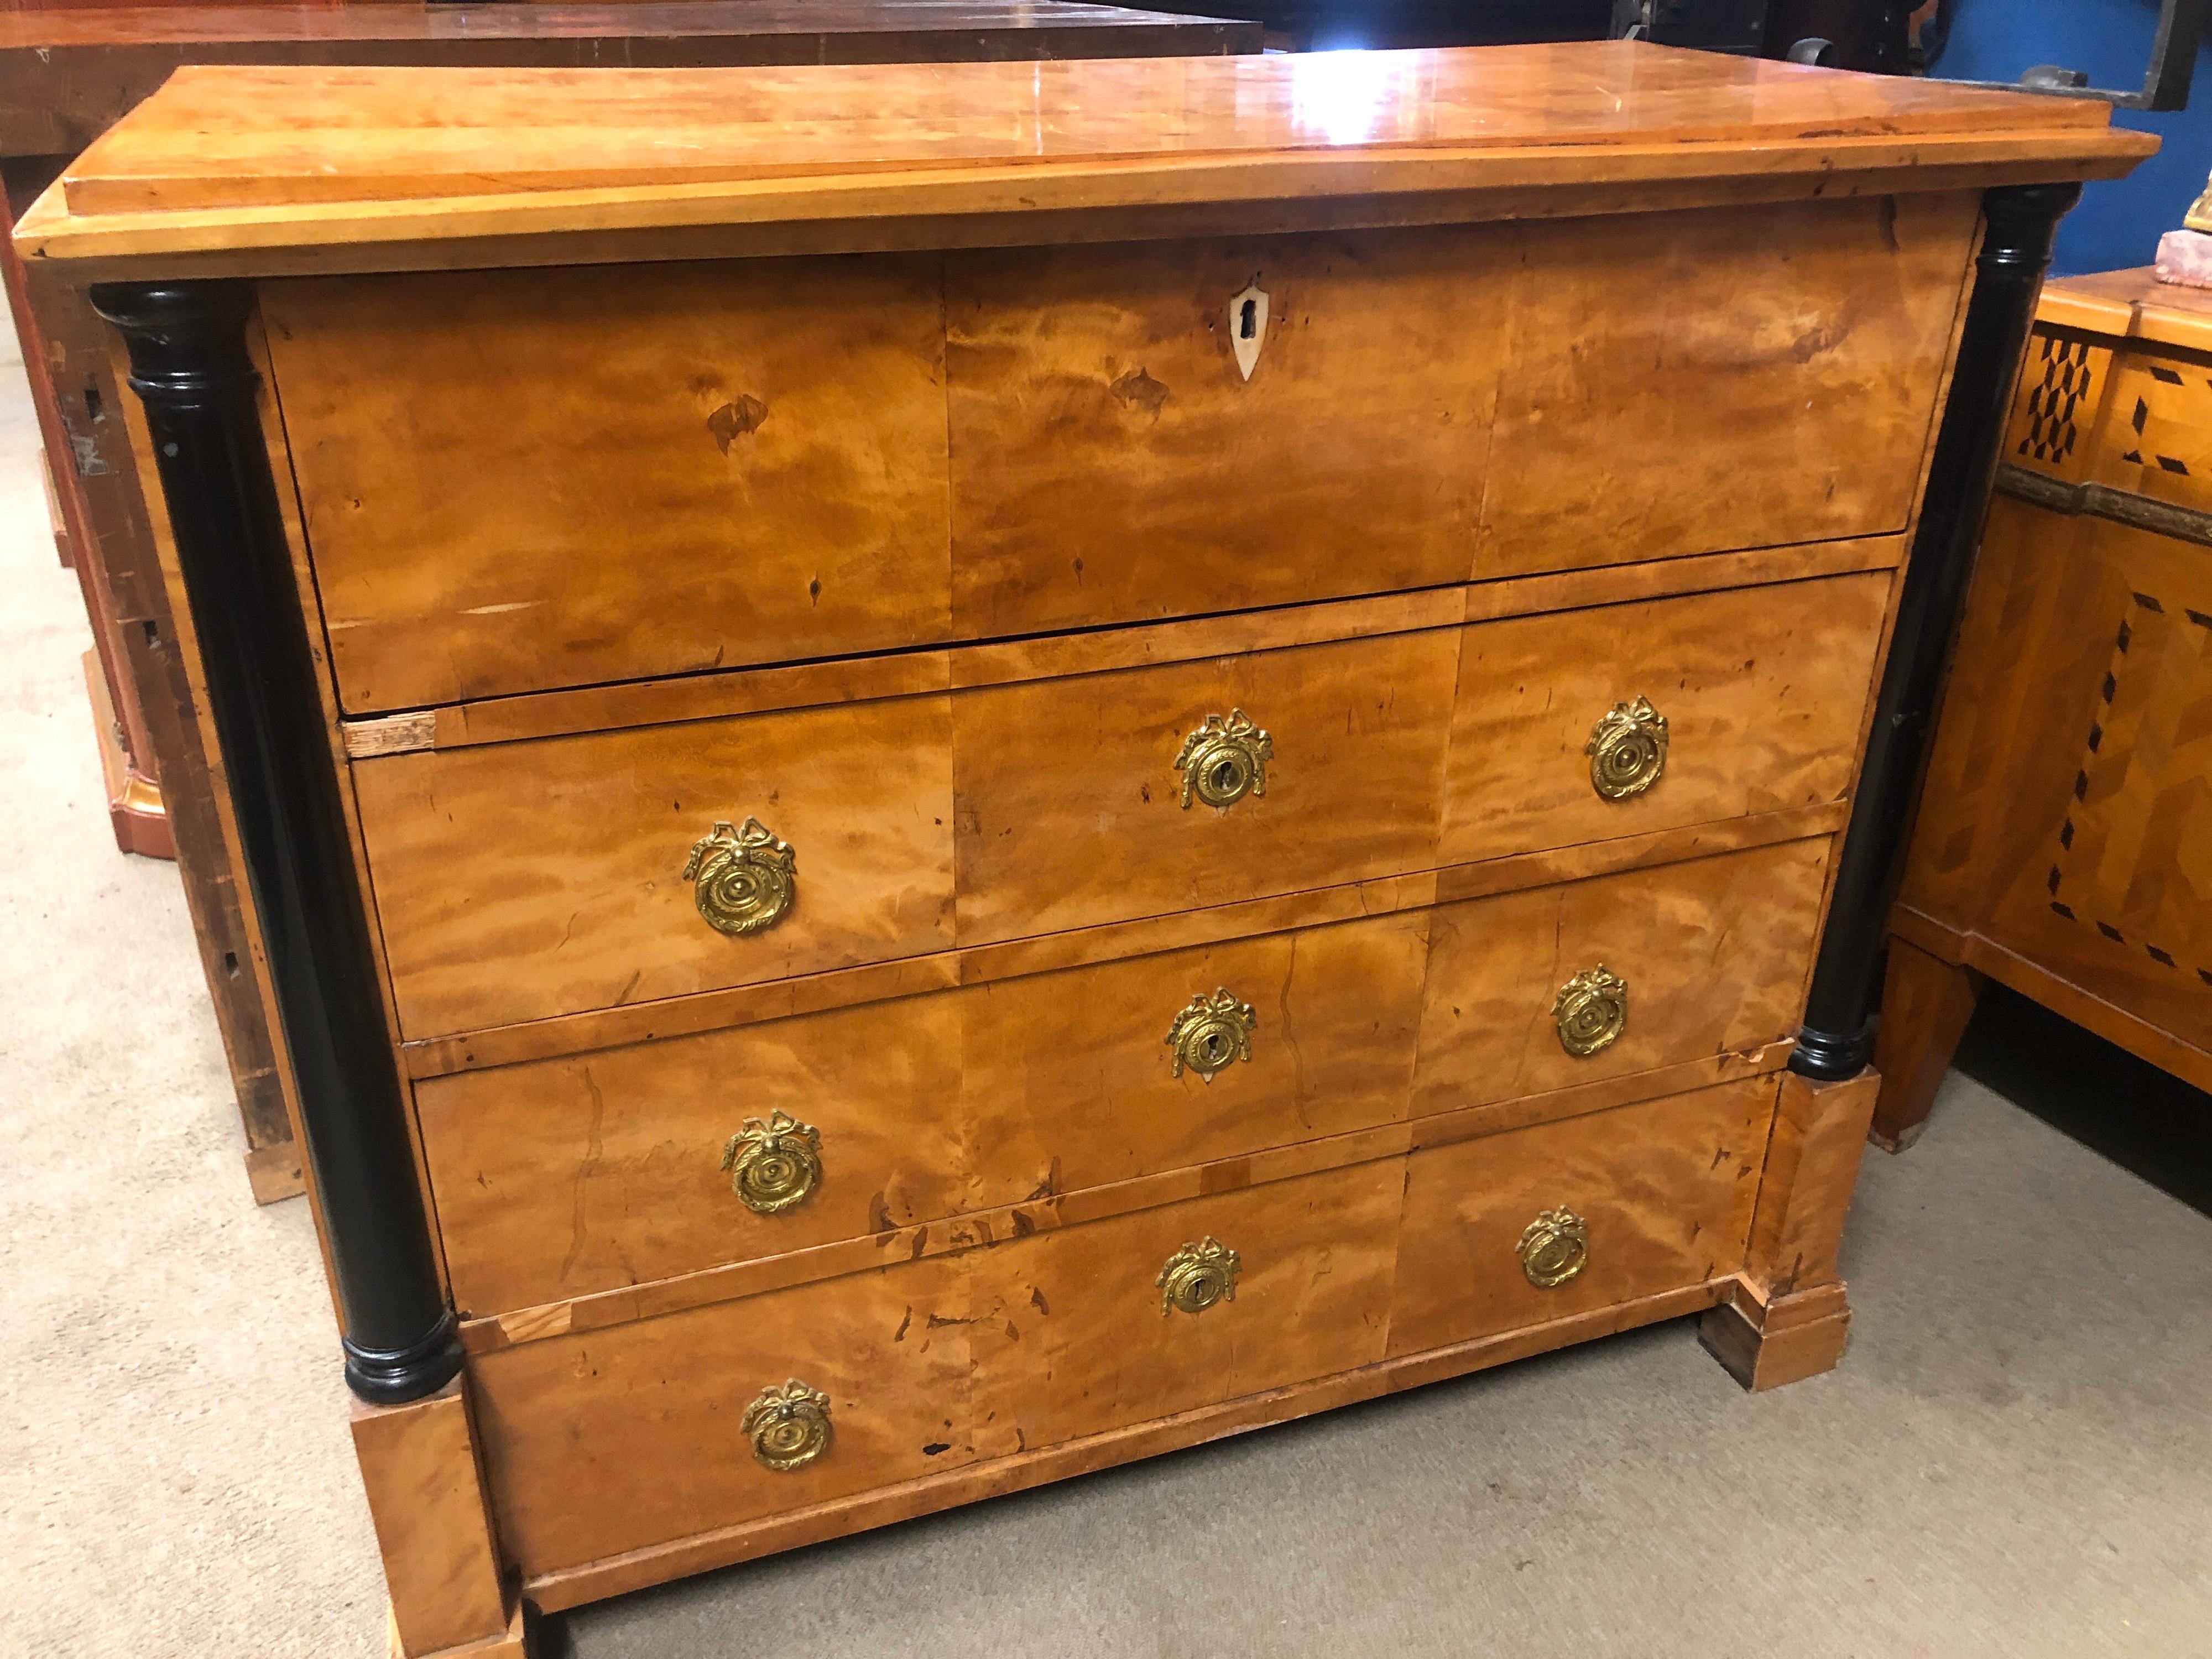 Fantastic example of a Biedermeier secretary dresser in birch wood, early Biedermeier era, with ebonized columns. Foot on plinth, first secretary drawer with secret in the central part. In good condition, small deficiencies to be restored.
We find